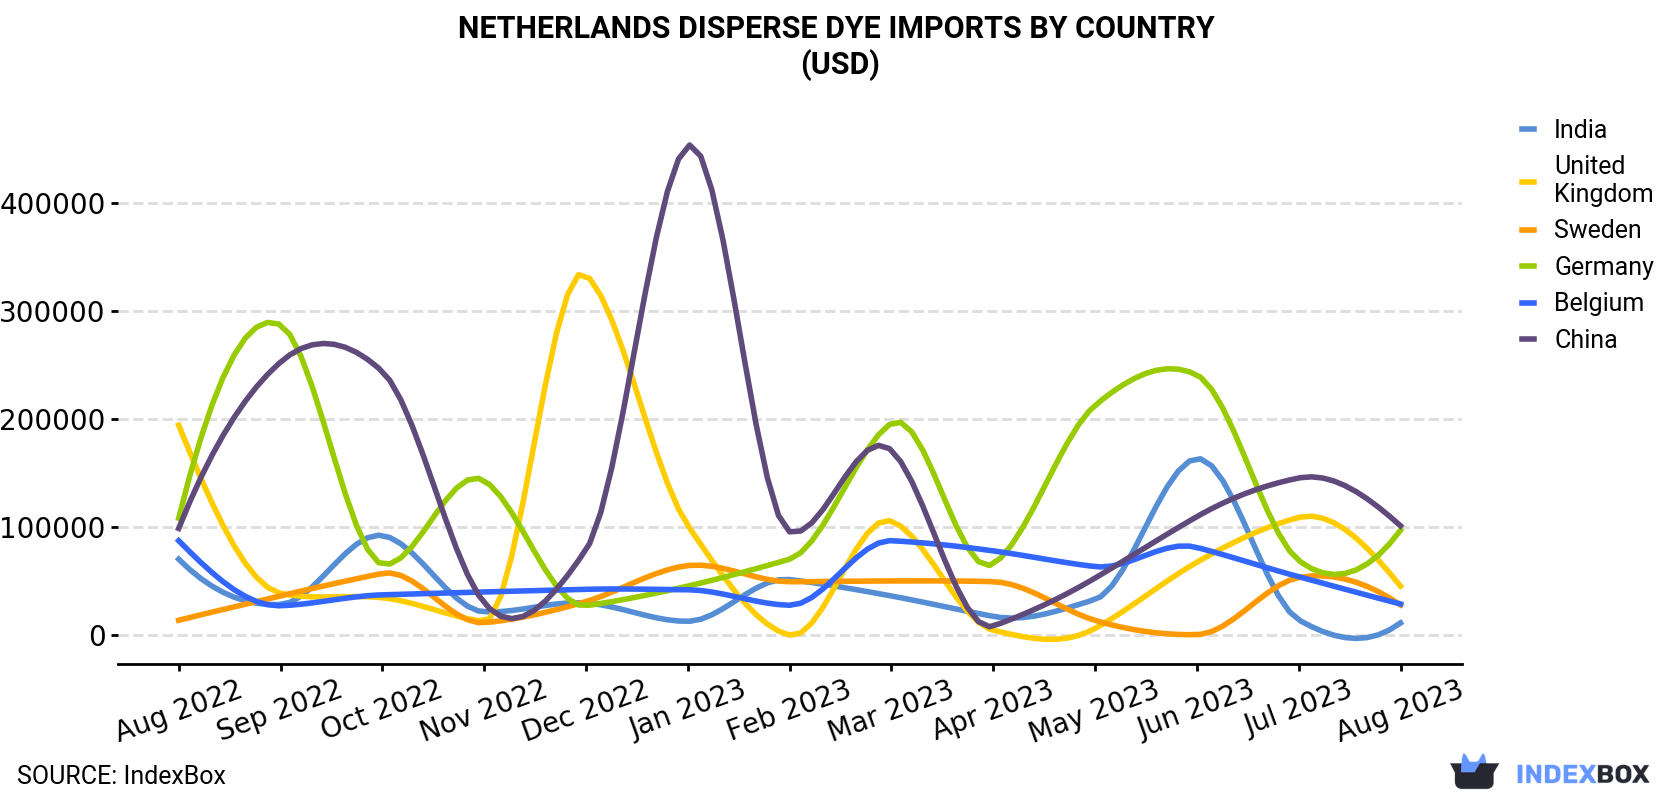 Netherlands Disperse Dye Imports By Country (USD)